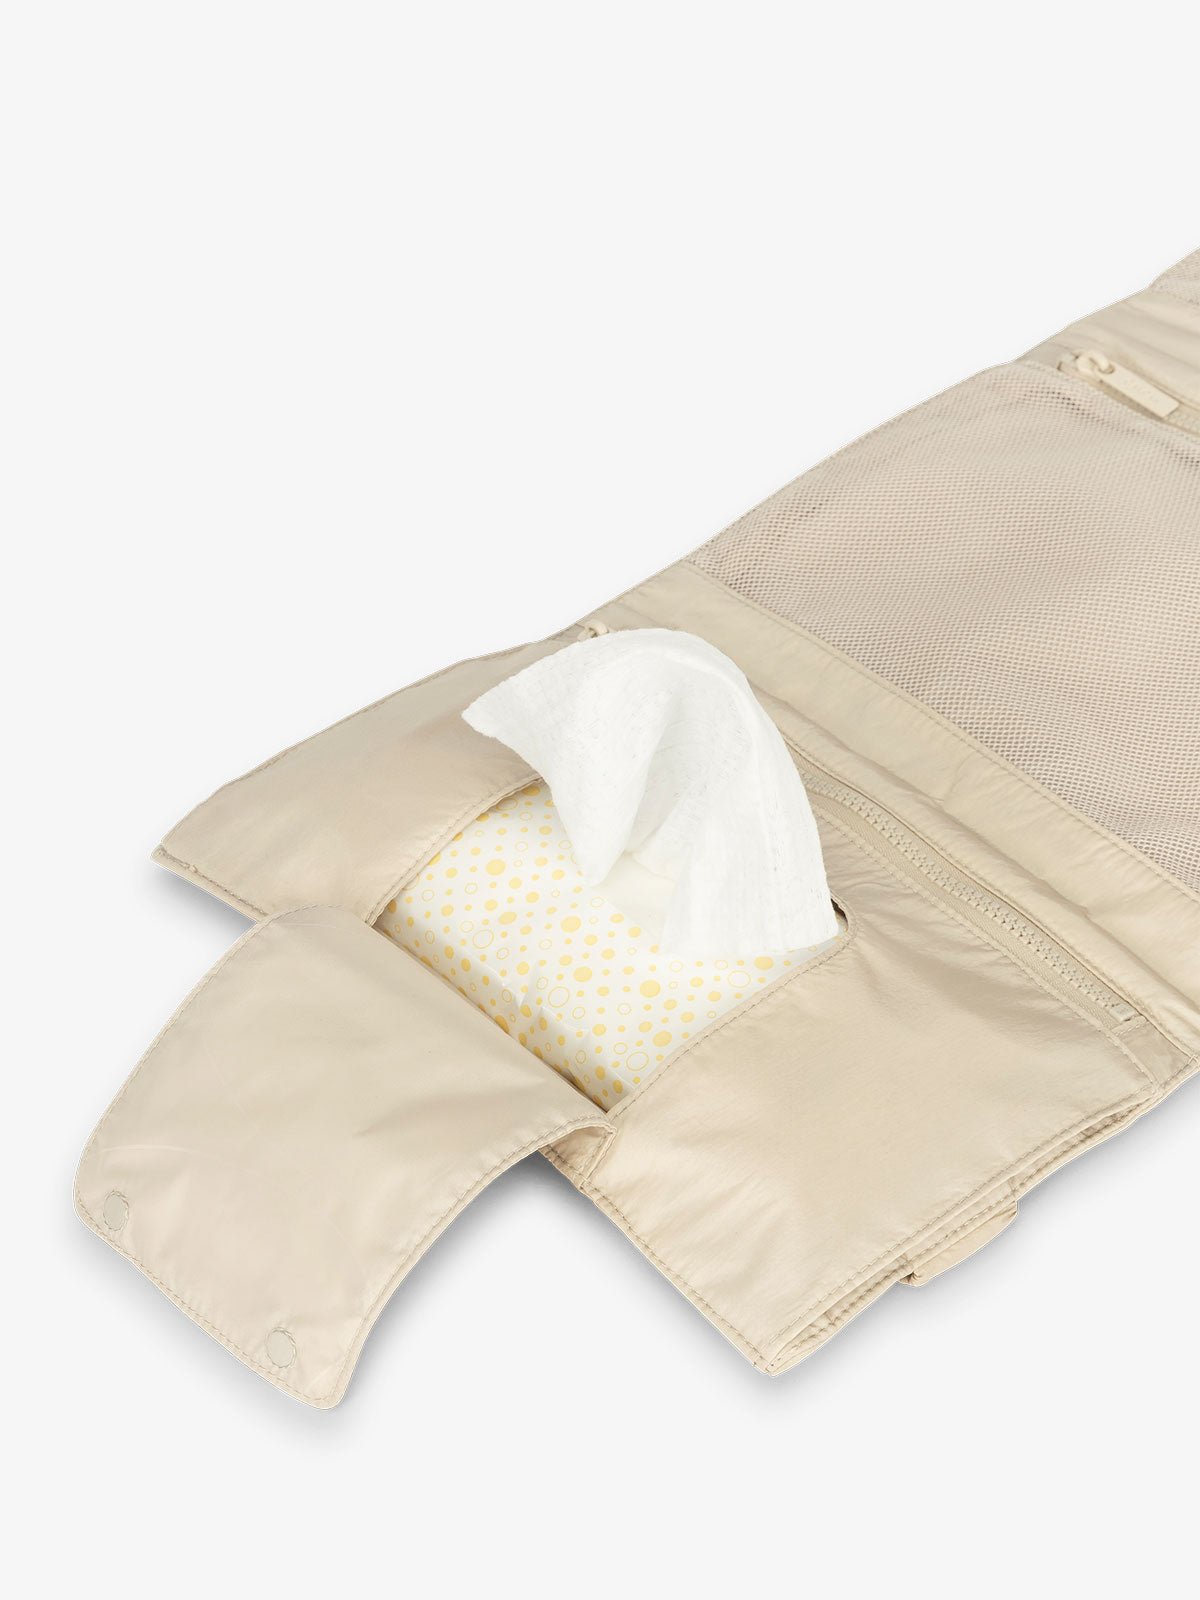 CALPAK portable changing pad clutch with dedicated baby wipe pocket in beige oatmeal